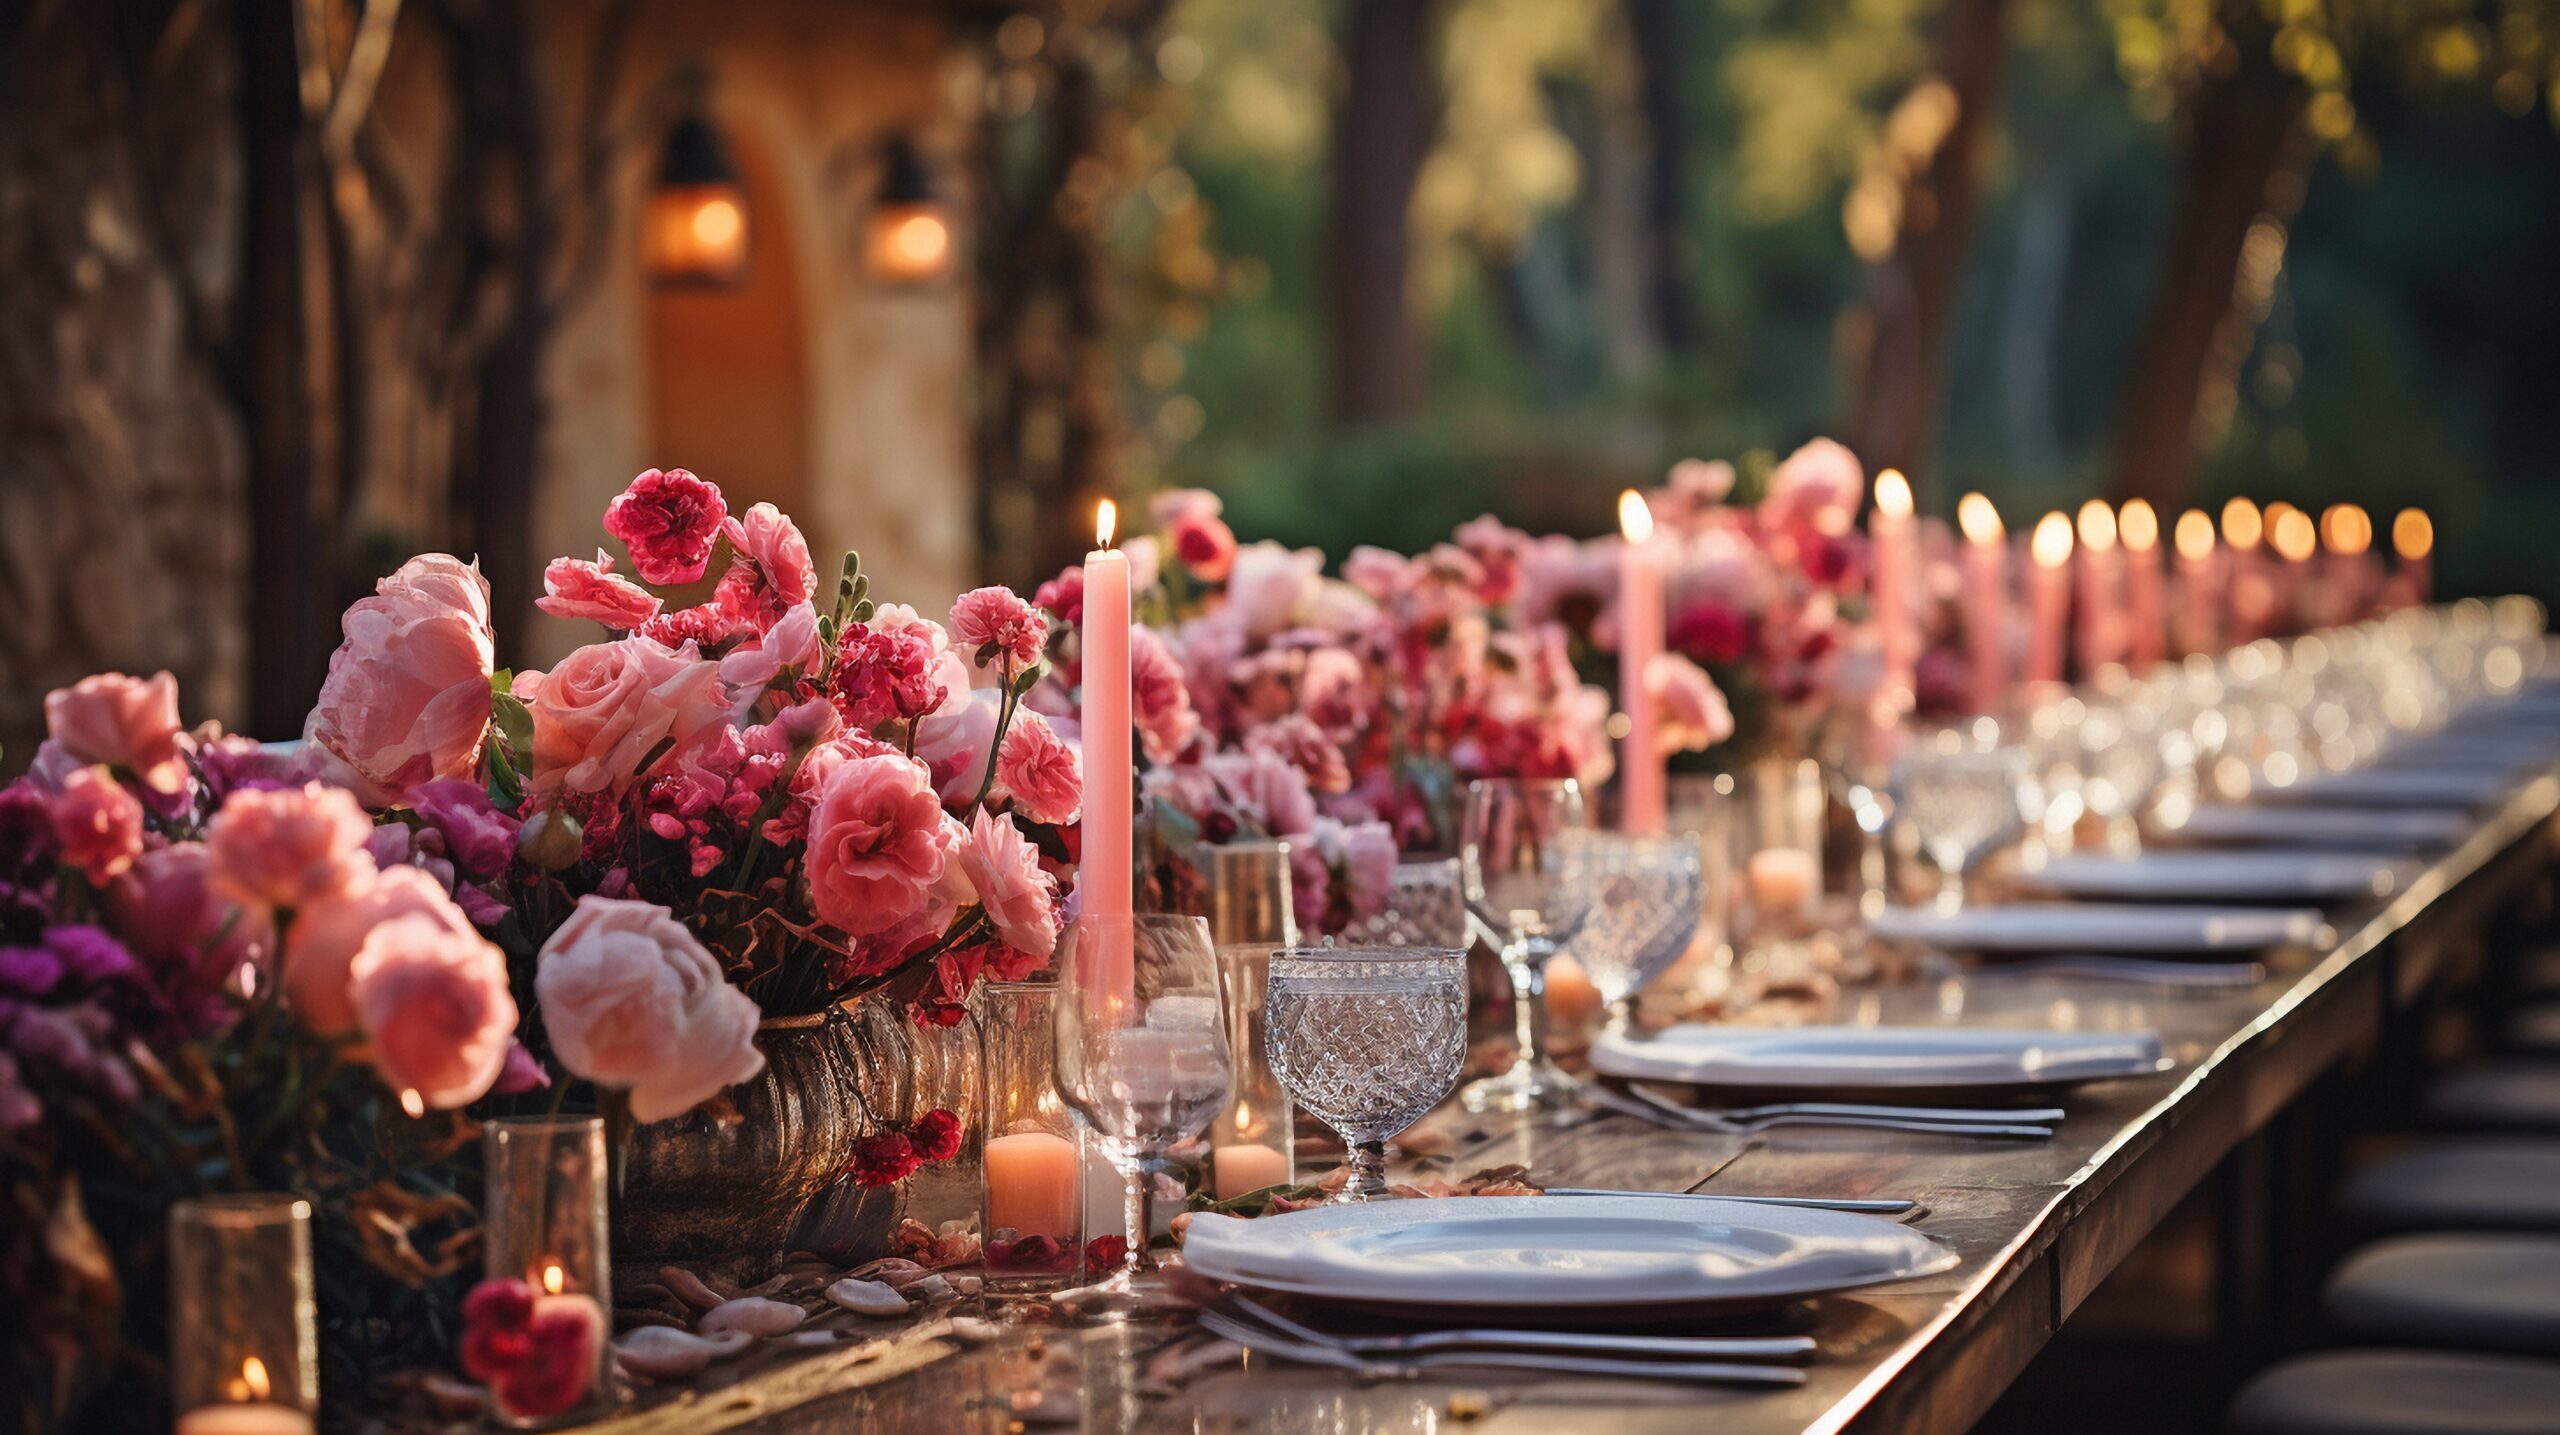 At the wedding reception, a garland made of pink flowers and eucalyptus rests on the table. Dinner in Italy